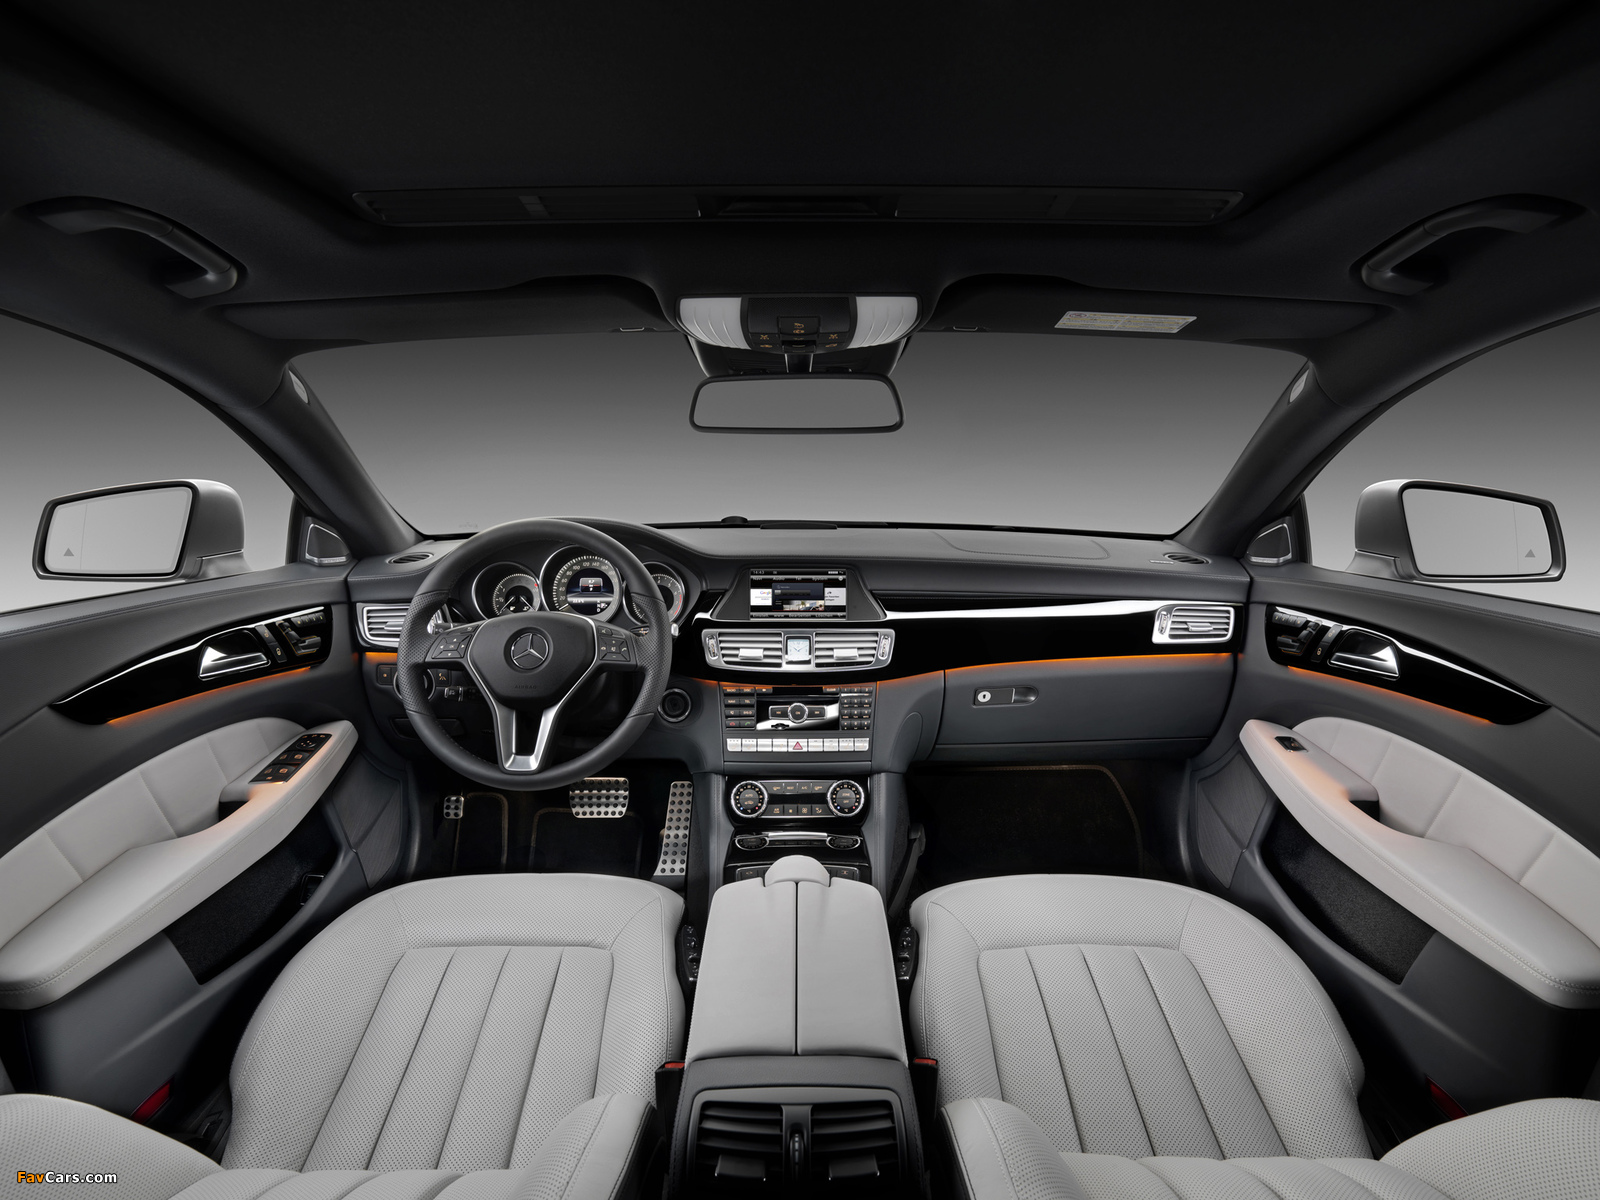 Mercedes-Benz CLS 500 Shooting Brake (X218) 2012 pictures (1600 x 1200)